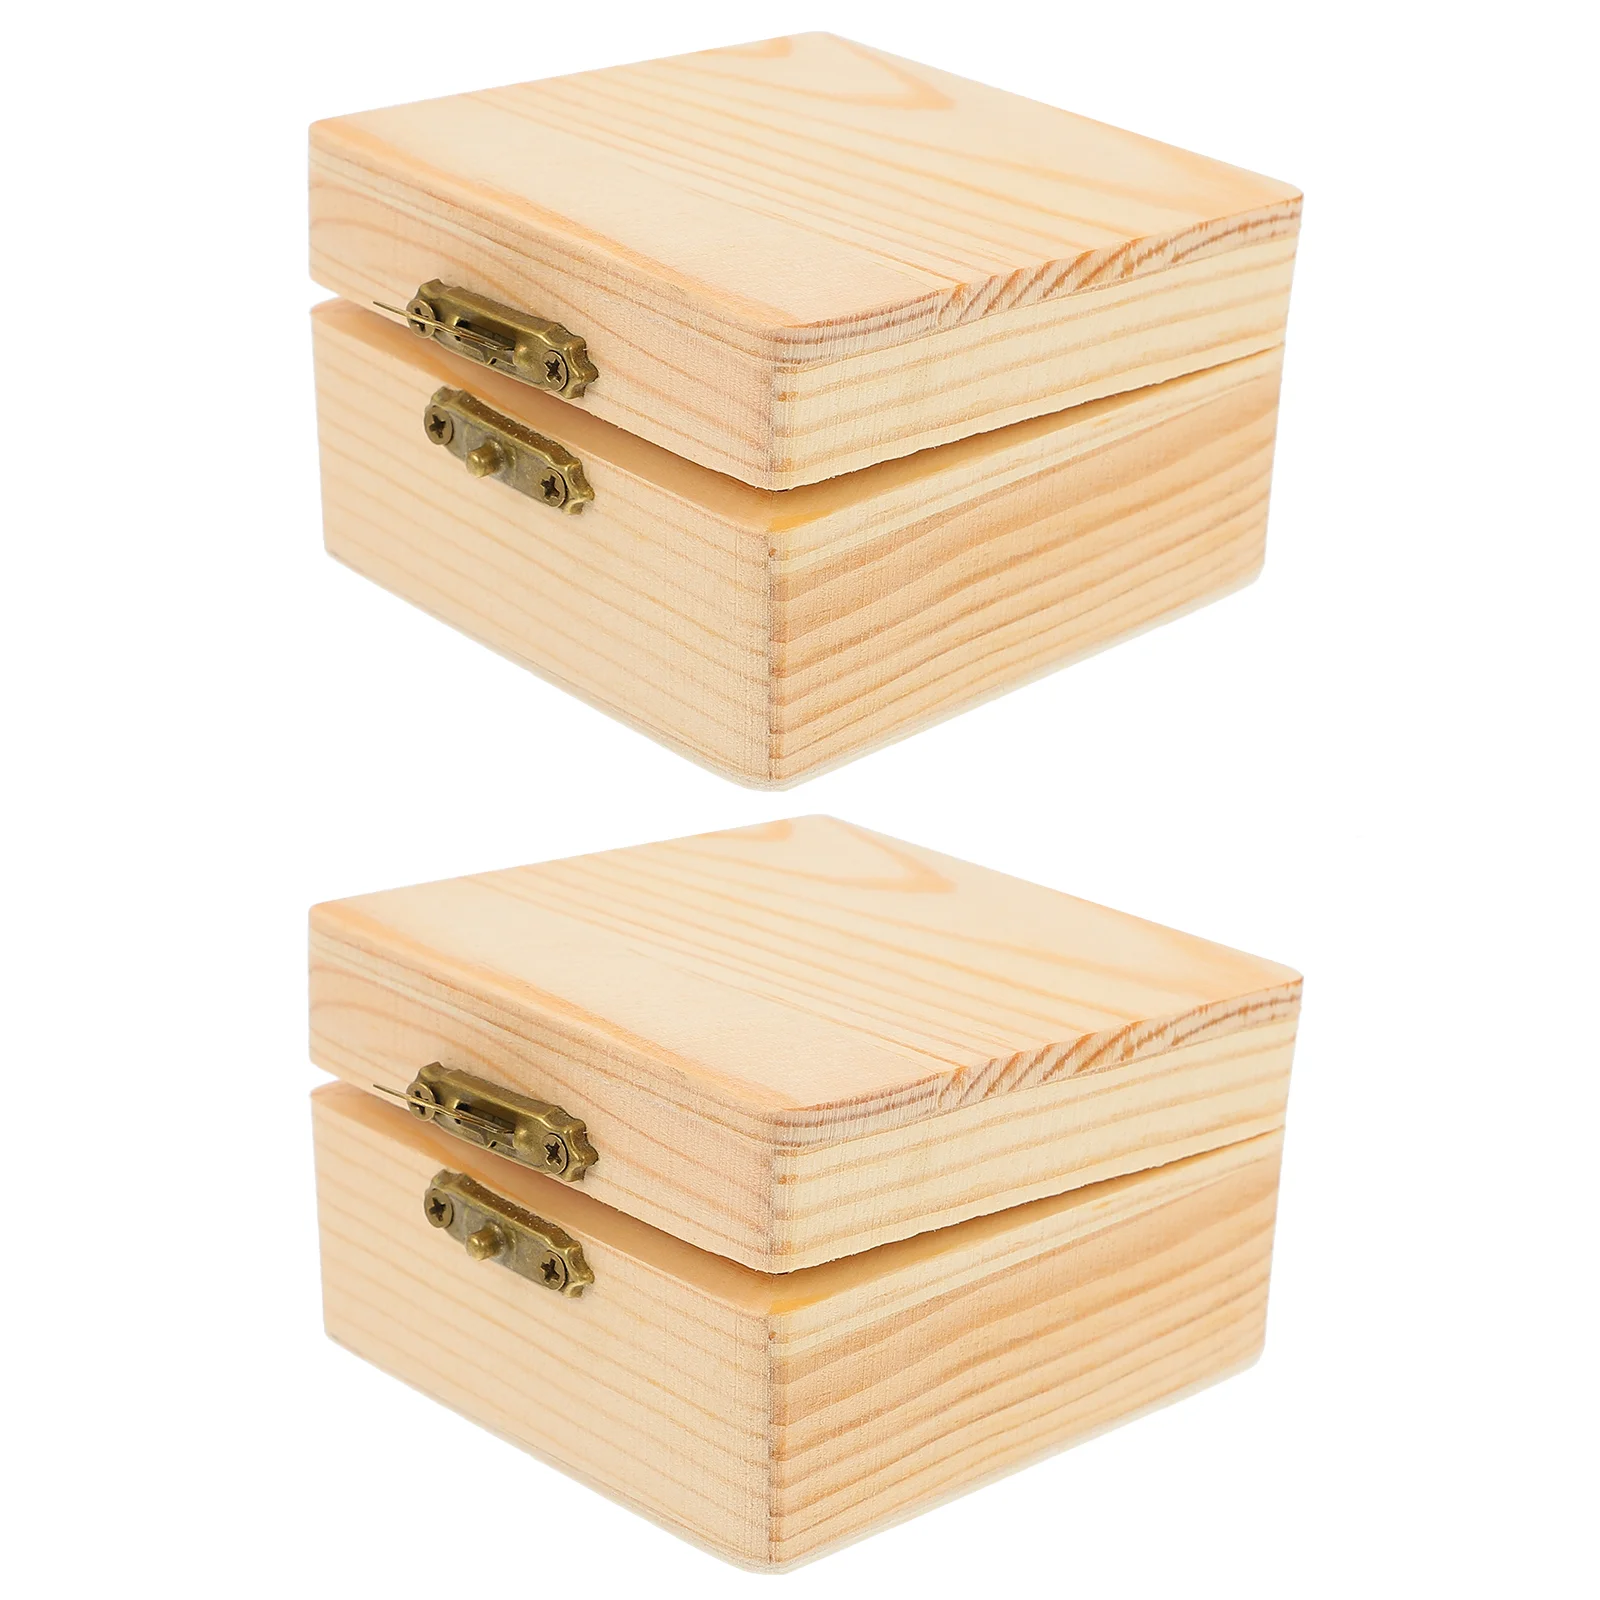 

Box Wood Wooden Boxes Unfinished Crafts Storage Case Craft Gift Candy Jewelry Keepsake Trinket Mini Square Clasp Car Interior